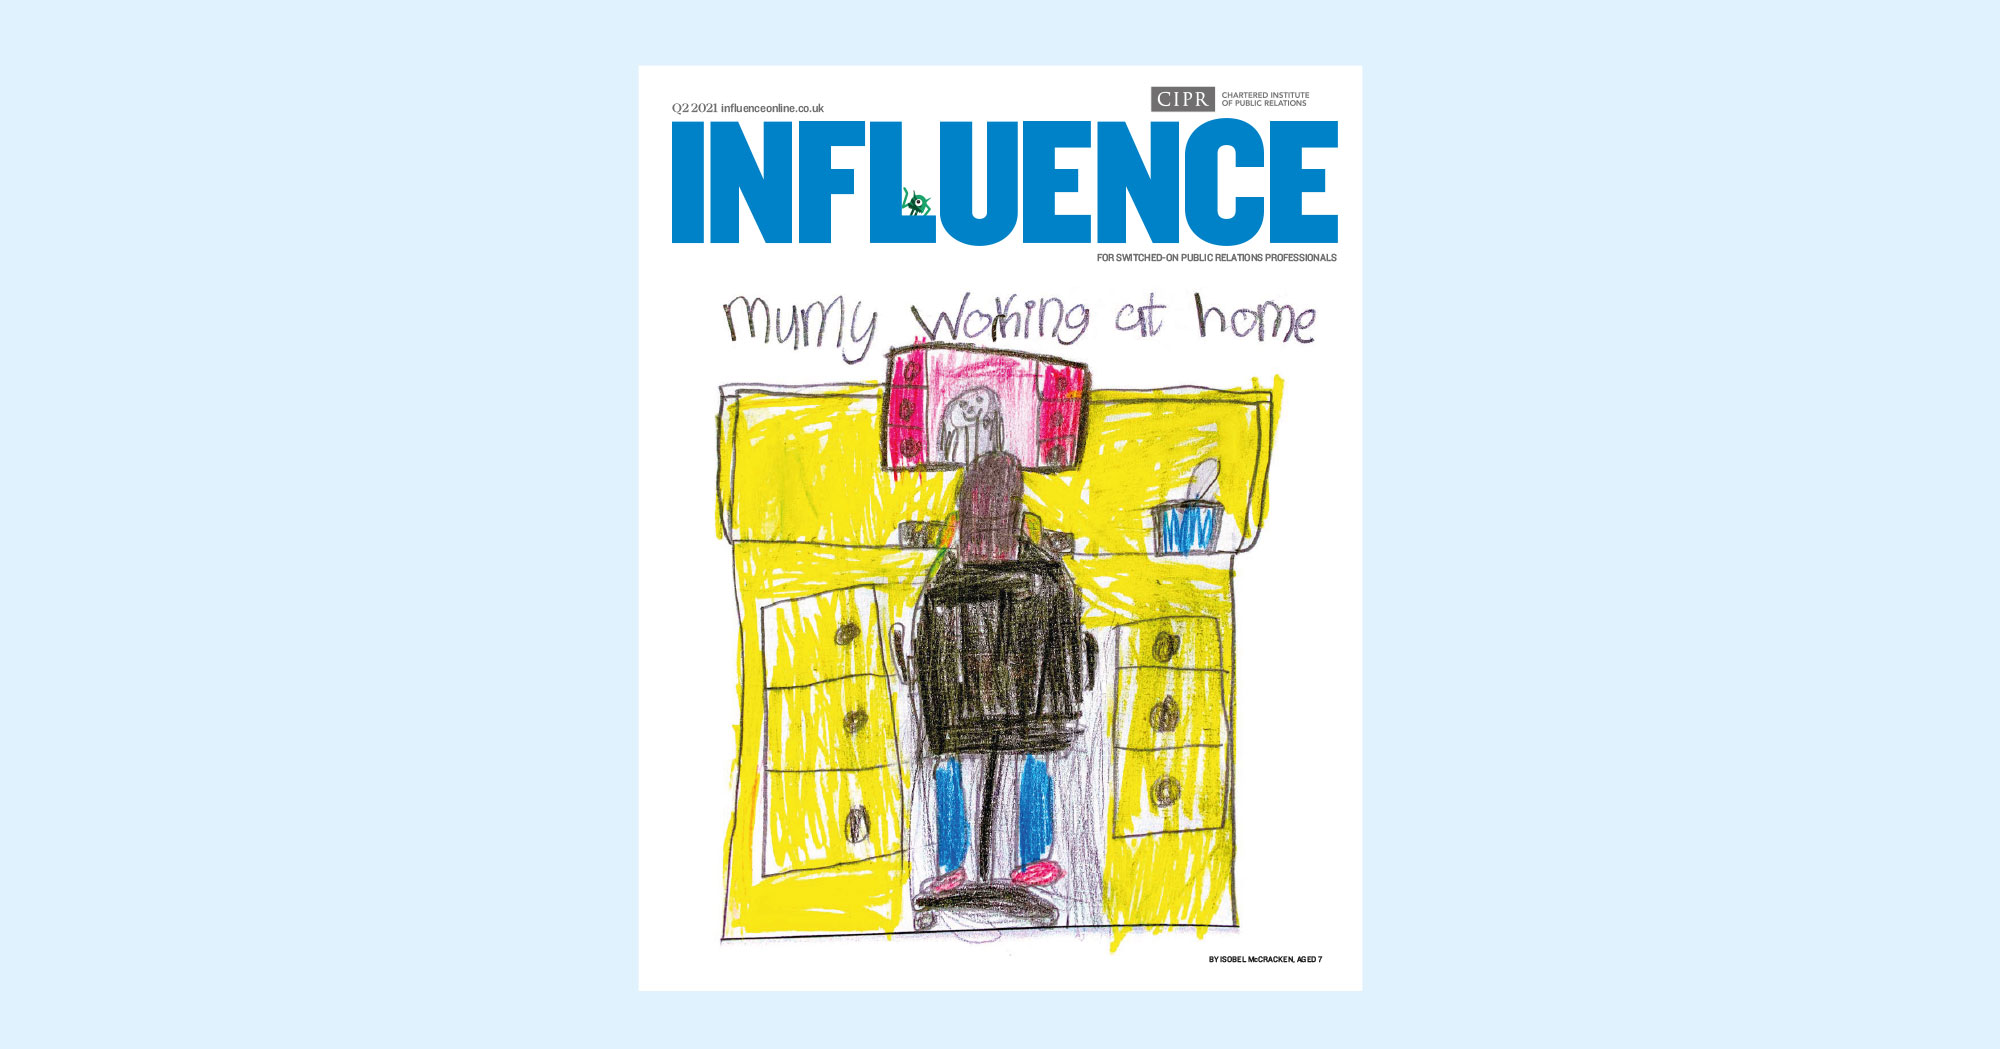 A child's drawing of a person working from home, used on the cover of Influence magazine.